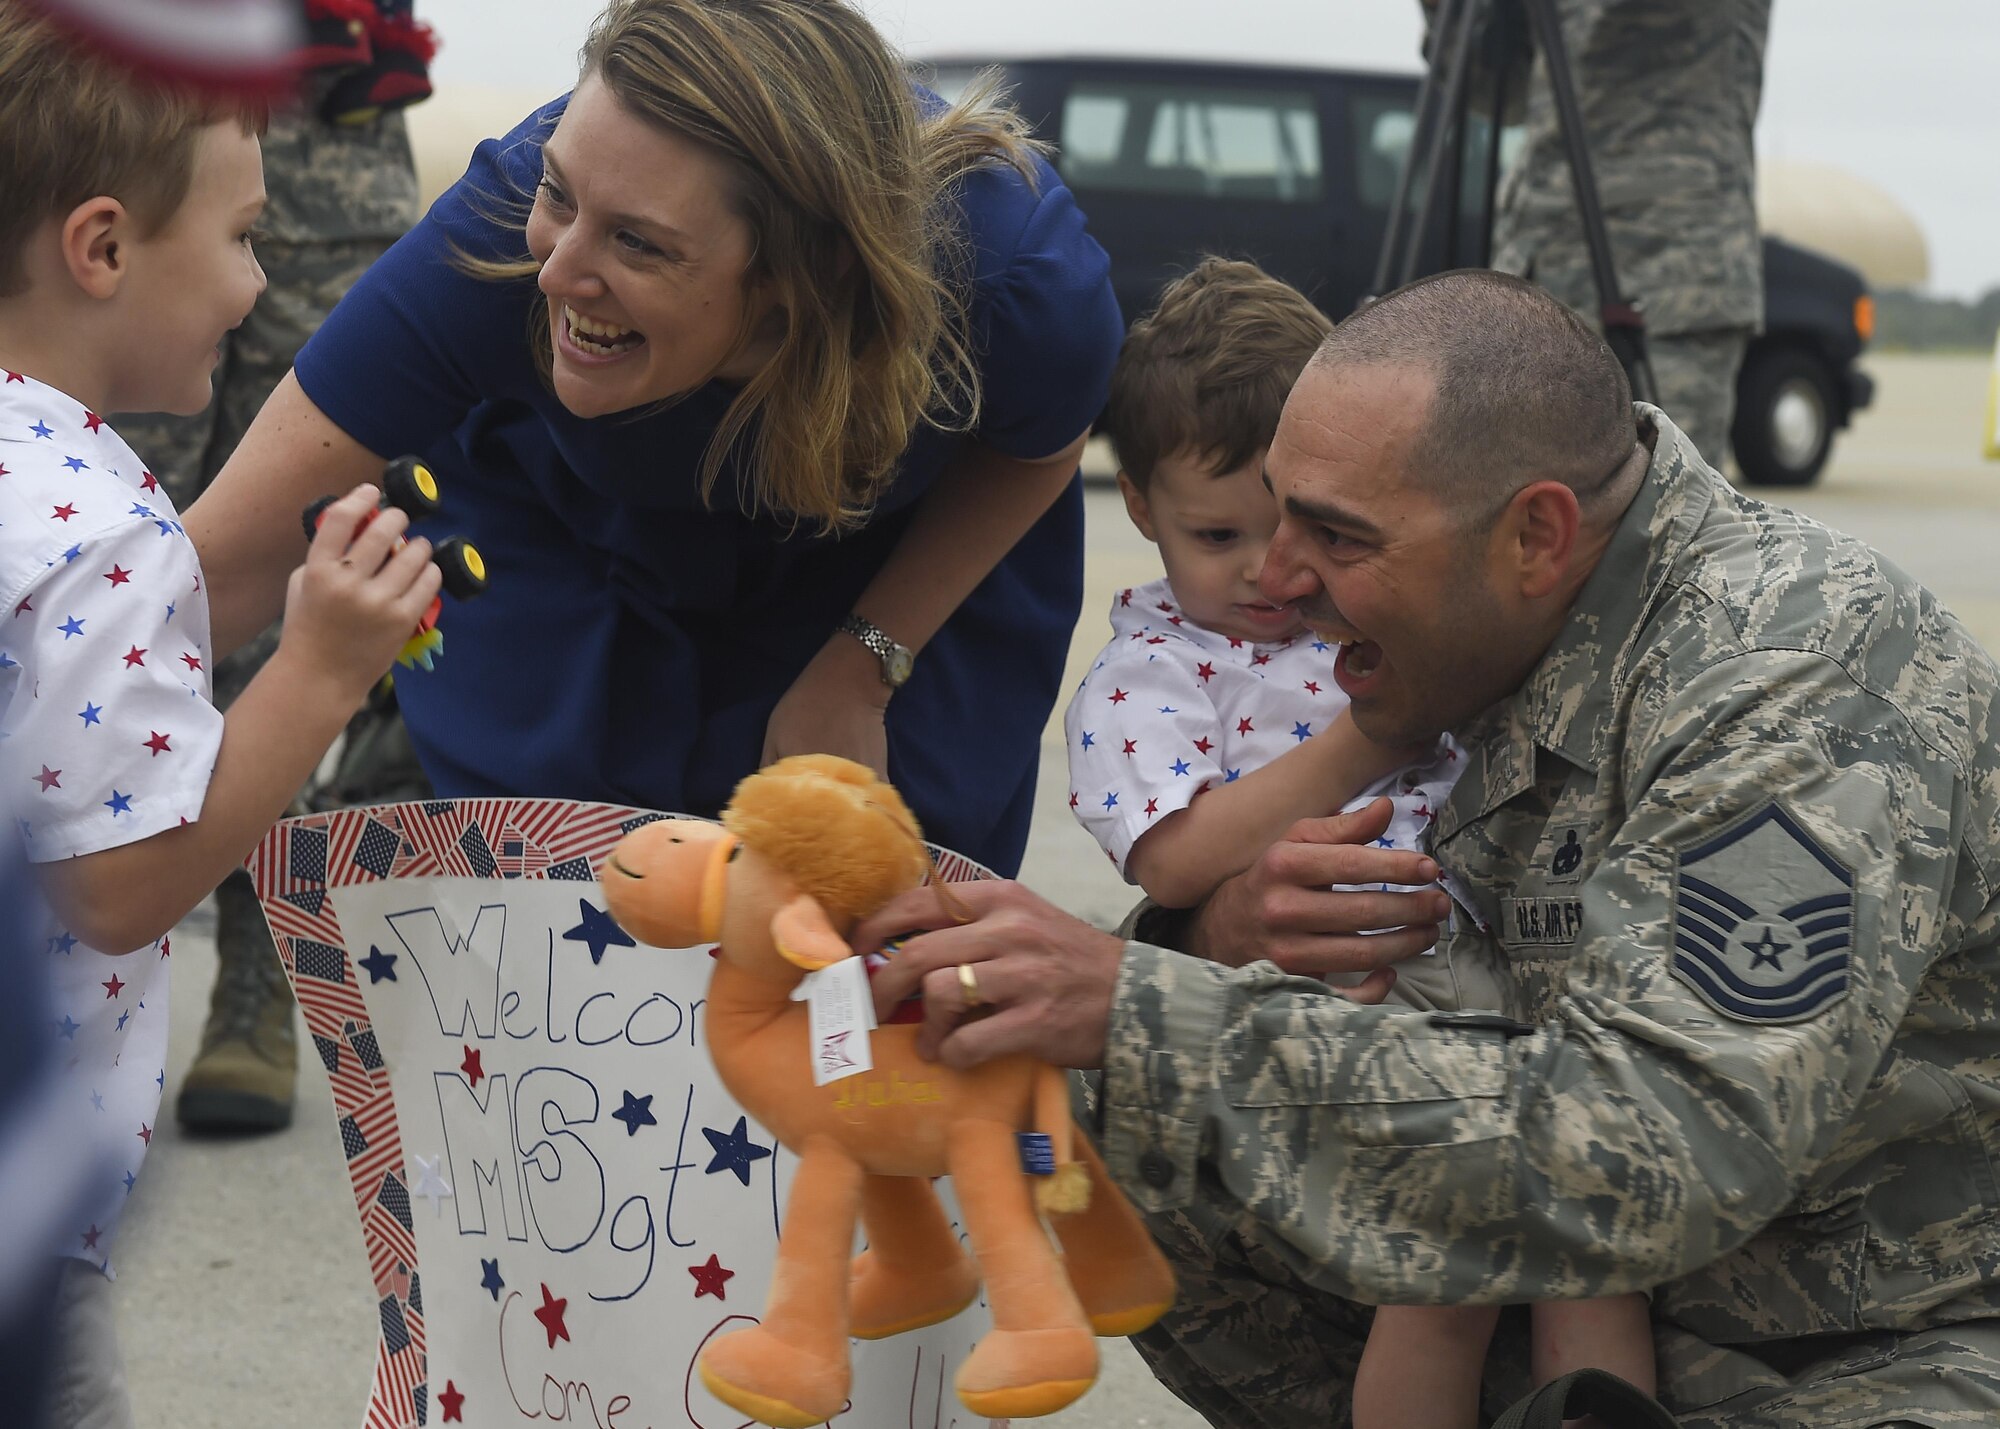 U.S. Air Force Master Sgt. Jeremiah Clarson, 192nd Maintenance Squadron quality assurance inspector, greets his family at Joint Base Langley-Eustis, Va., Oct. 12, 2017.